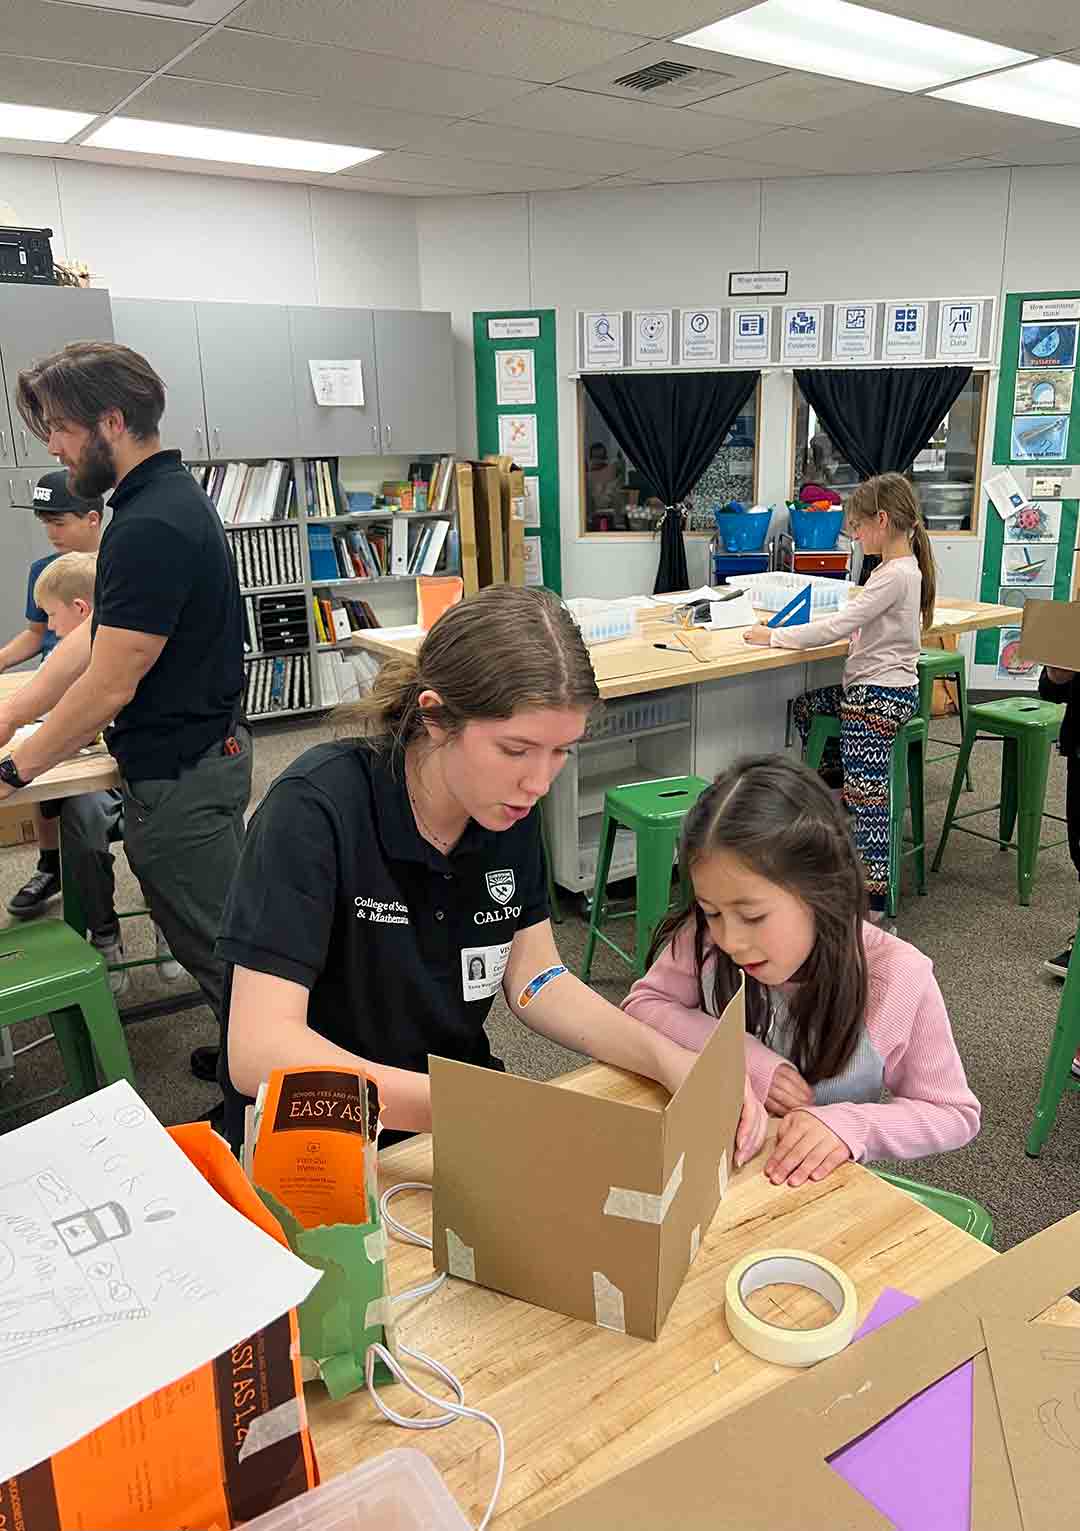 A Cal Poly student in a black shirt sits at a desk and helps a young child with a construction made of cardboard pieces.